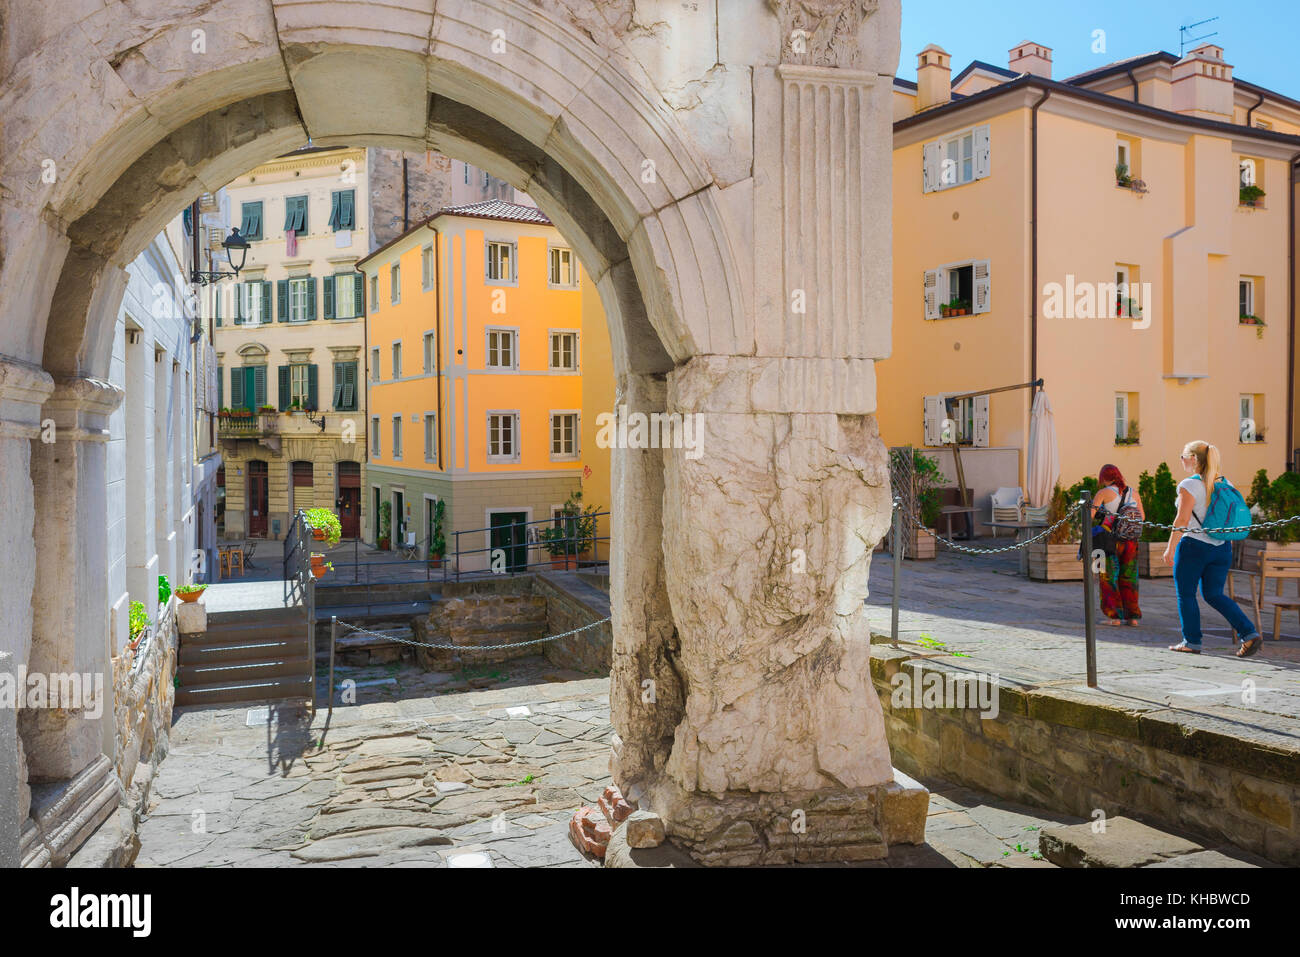 Trieste Italy Ancient Roman Arch Known As The Arco Di Riccardo Stock Photo Alamy